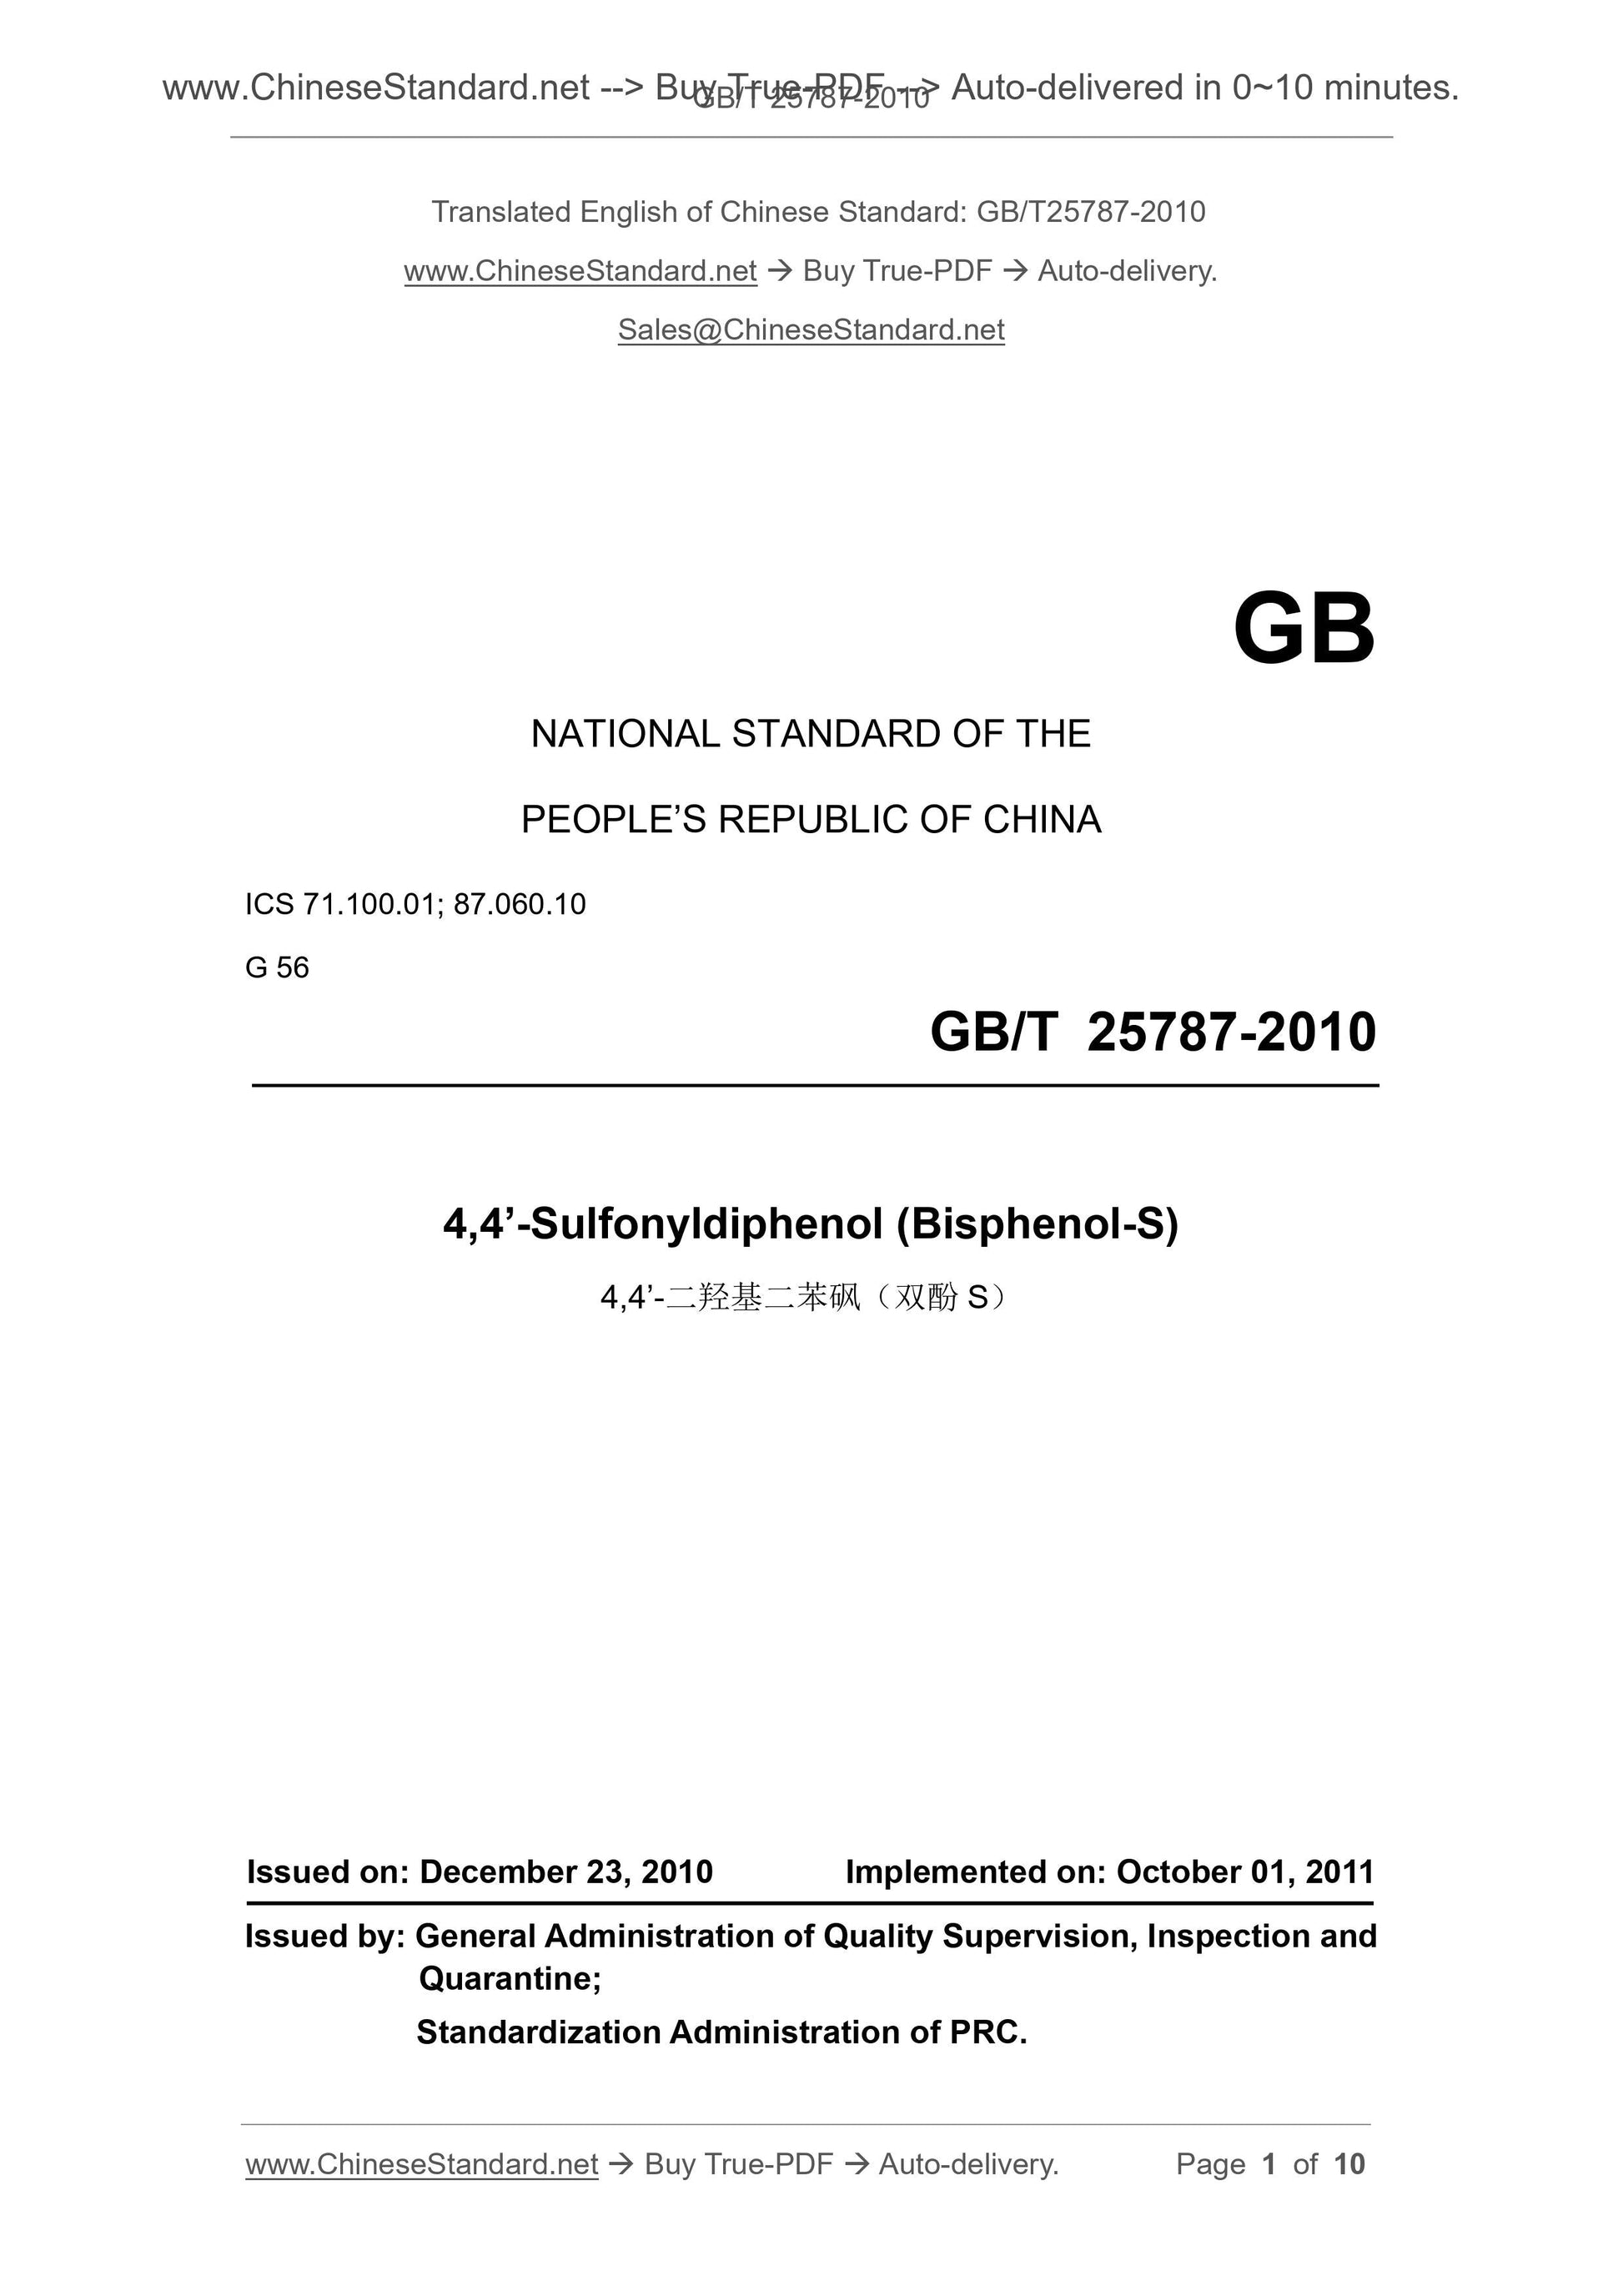 GB/T 25787-2010 Page 1